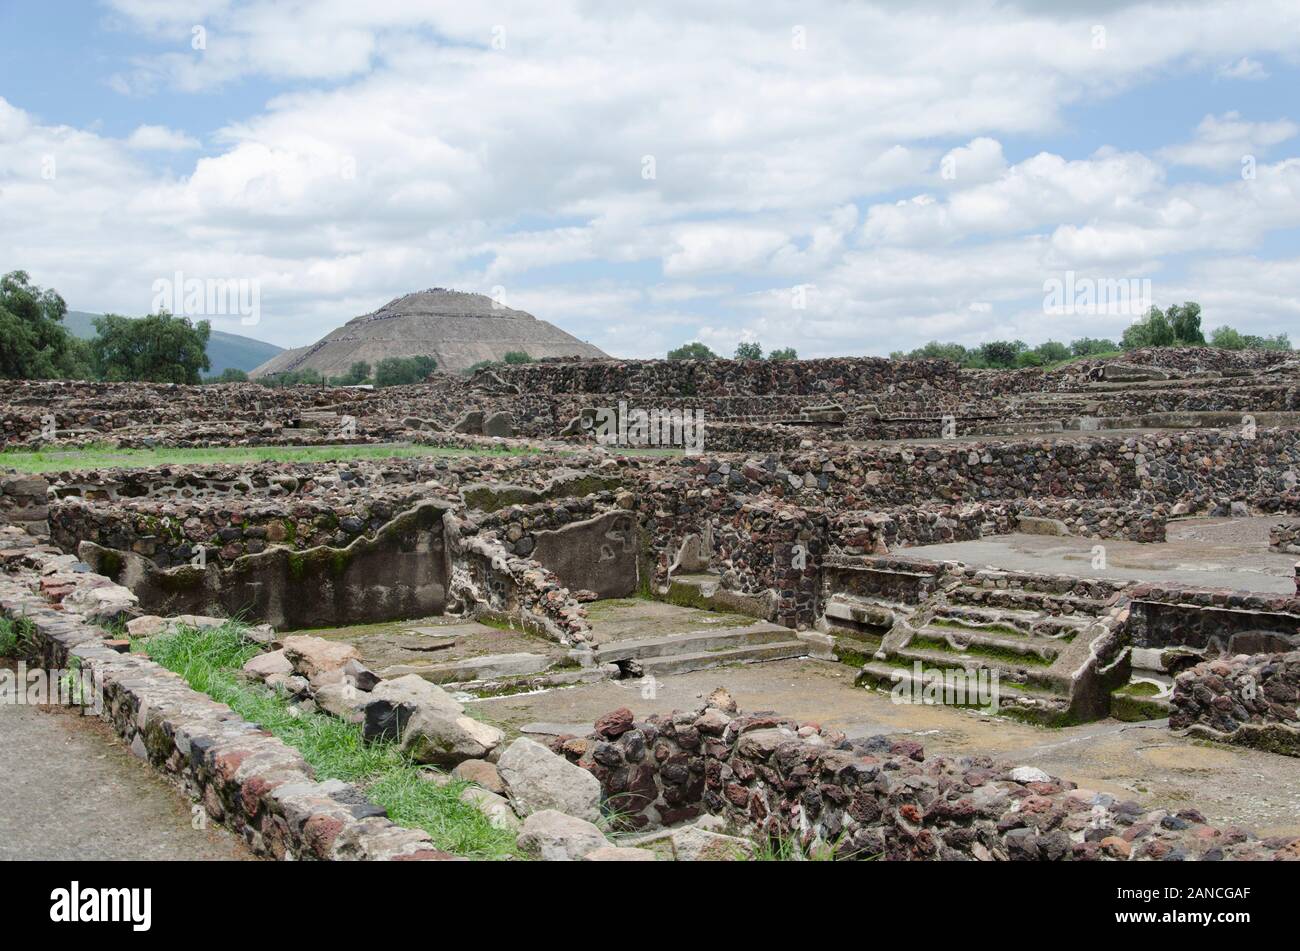 Pyramid of the Sun and other prehispanic ruins in Teotihuacan, an ancient Mesoamerican city located in a sub-valley of the Valley of Mexico Stock Photo